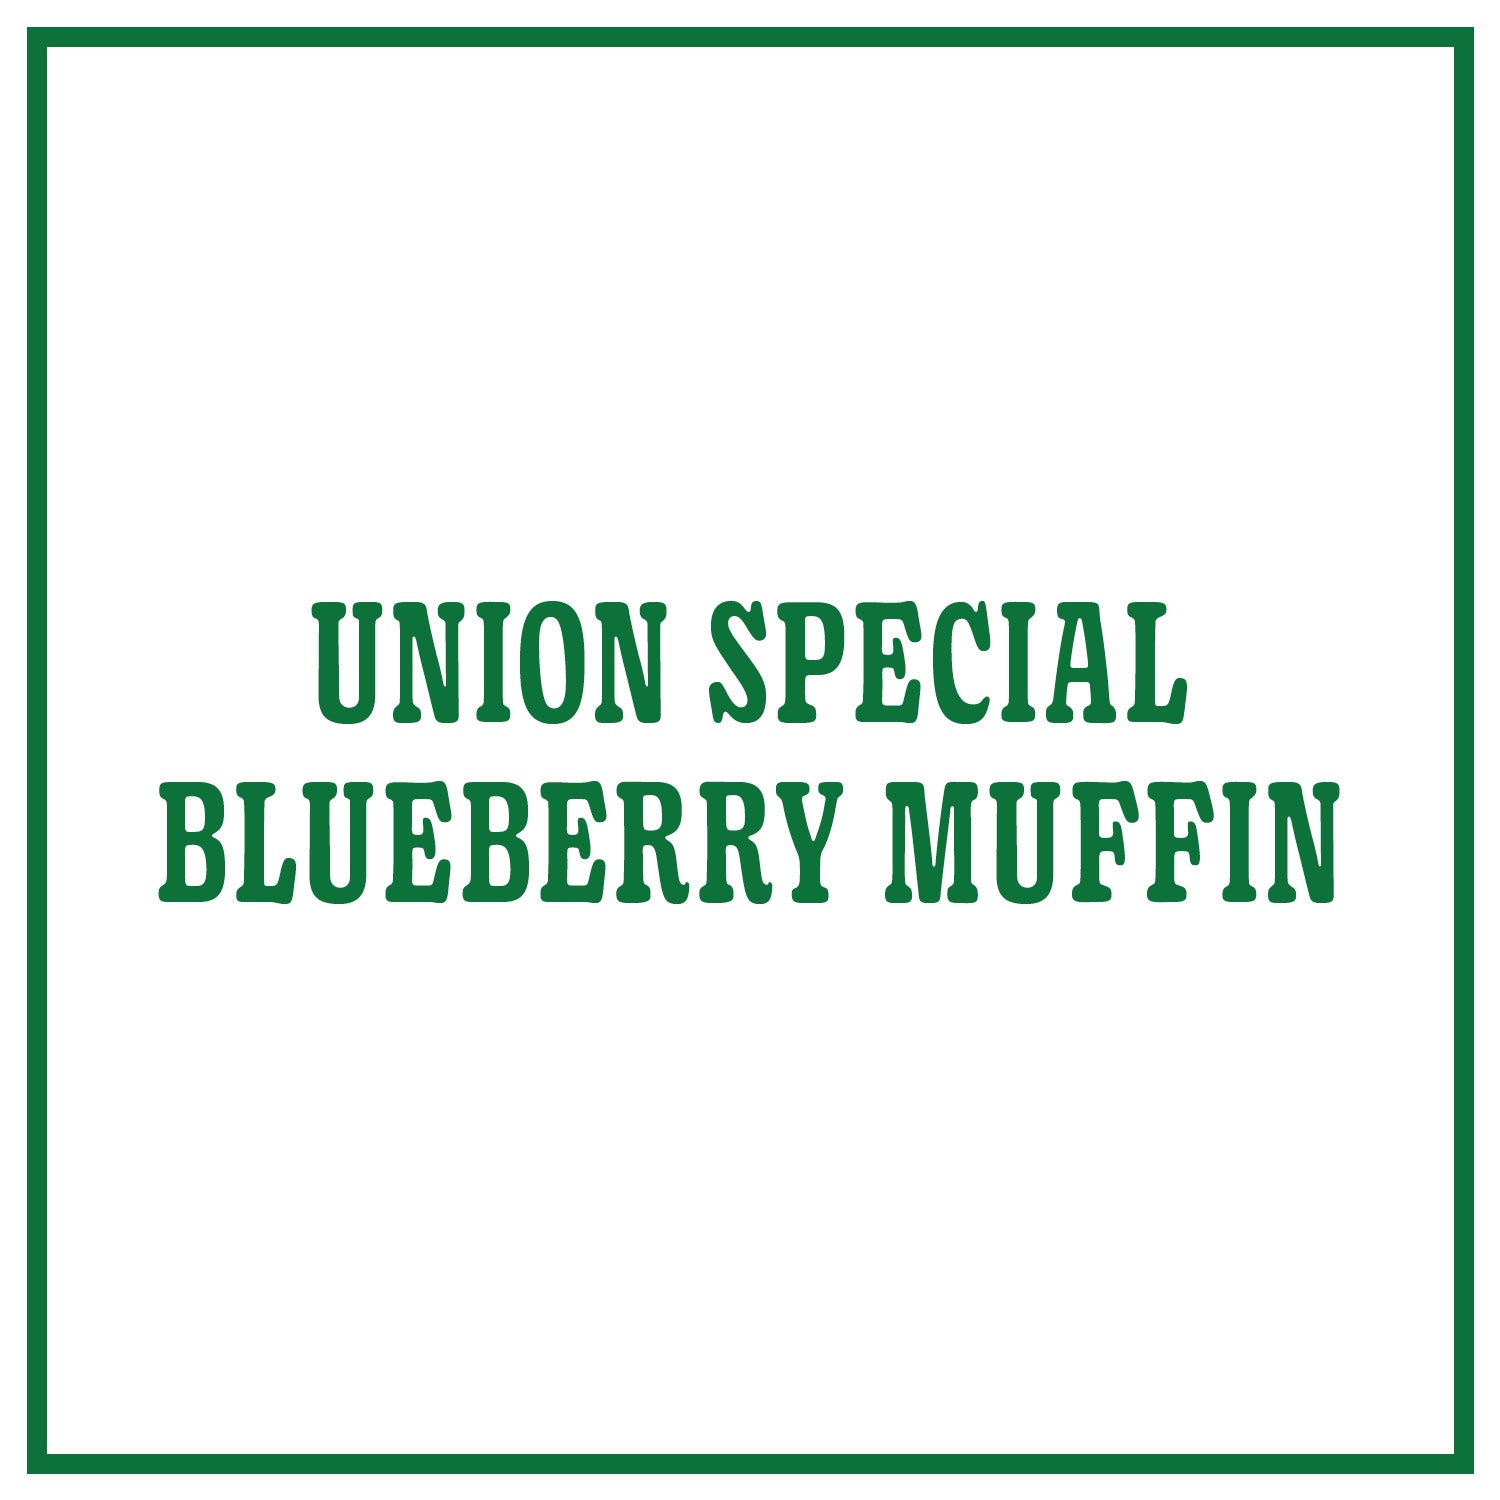 Union Special Blueberry Muffin